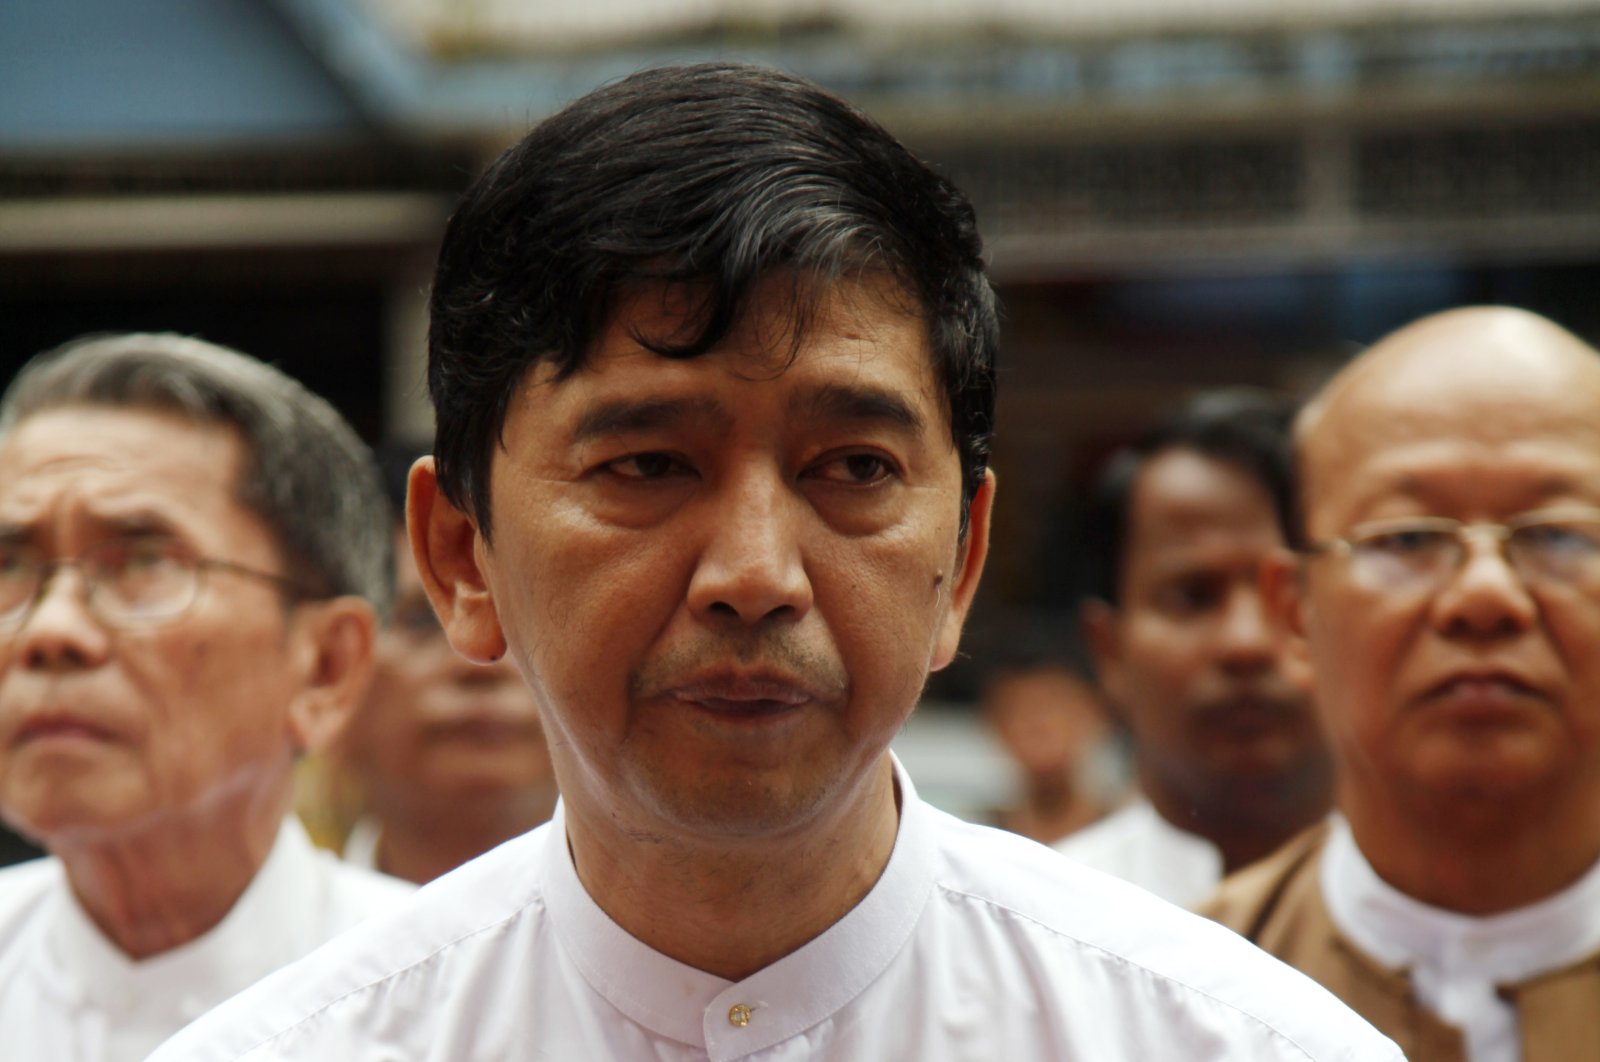 File photo of Min Ko Naing, whose citizenship has been revoked by the ruling military junta along with other top members of the main group coordinating resistance to army rule (AP Photo)